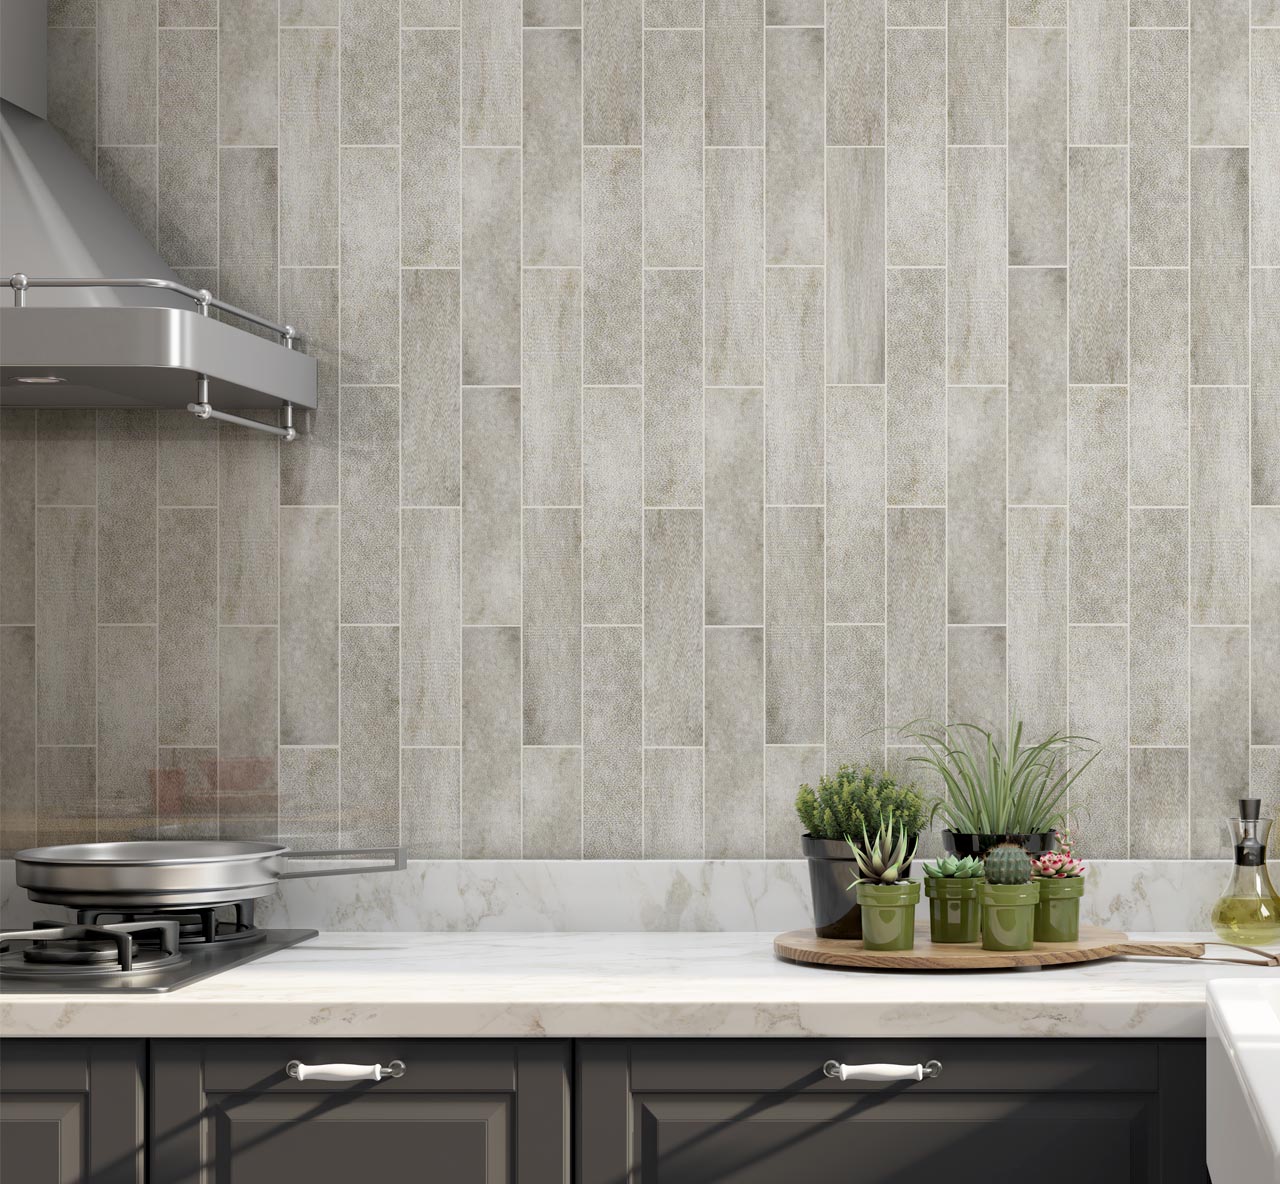 Marakkesh Grey Gloss Metro Tiles used as polished kitchen wall tiles in a calming grey kitchen